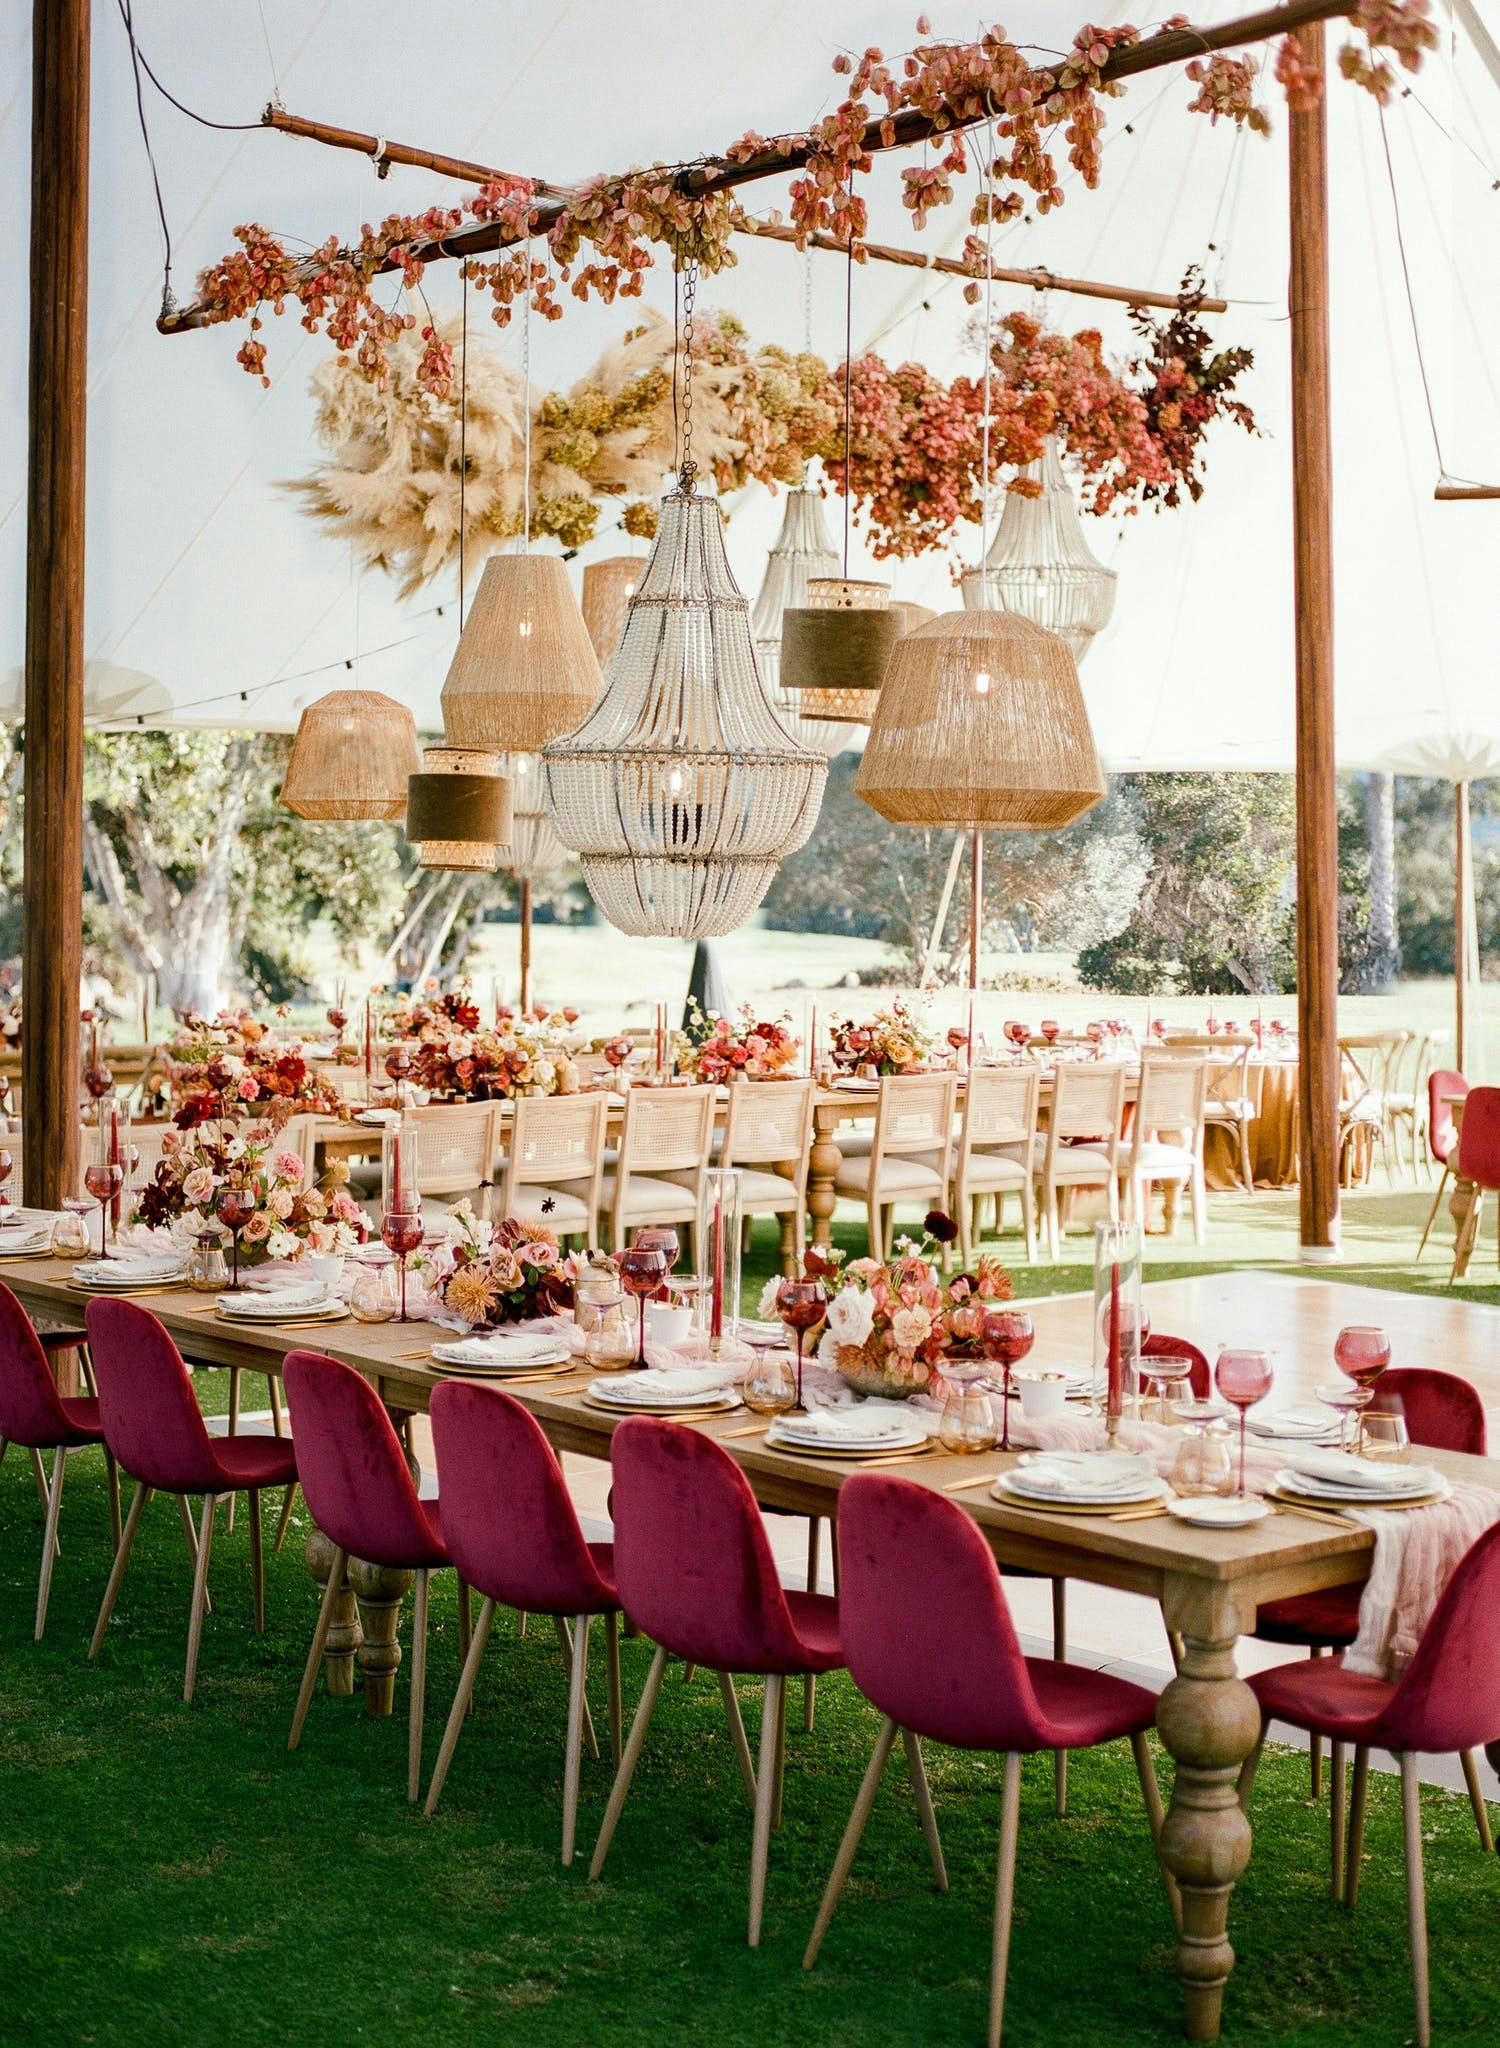 Rustic floral wedding with draping chandeliers and berry decal | PartySlate